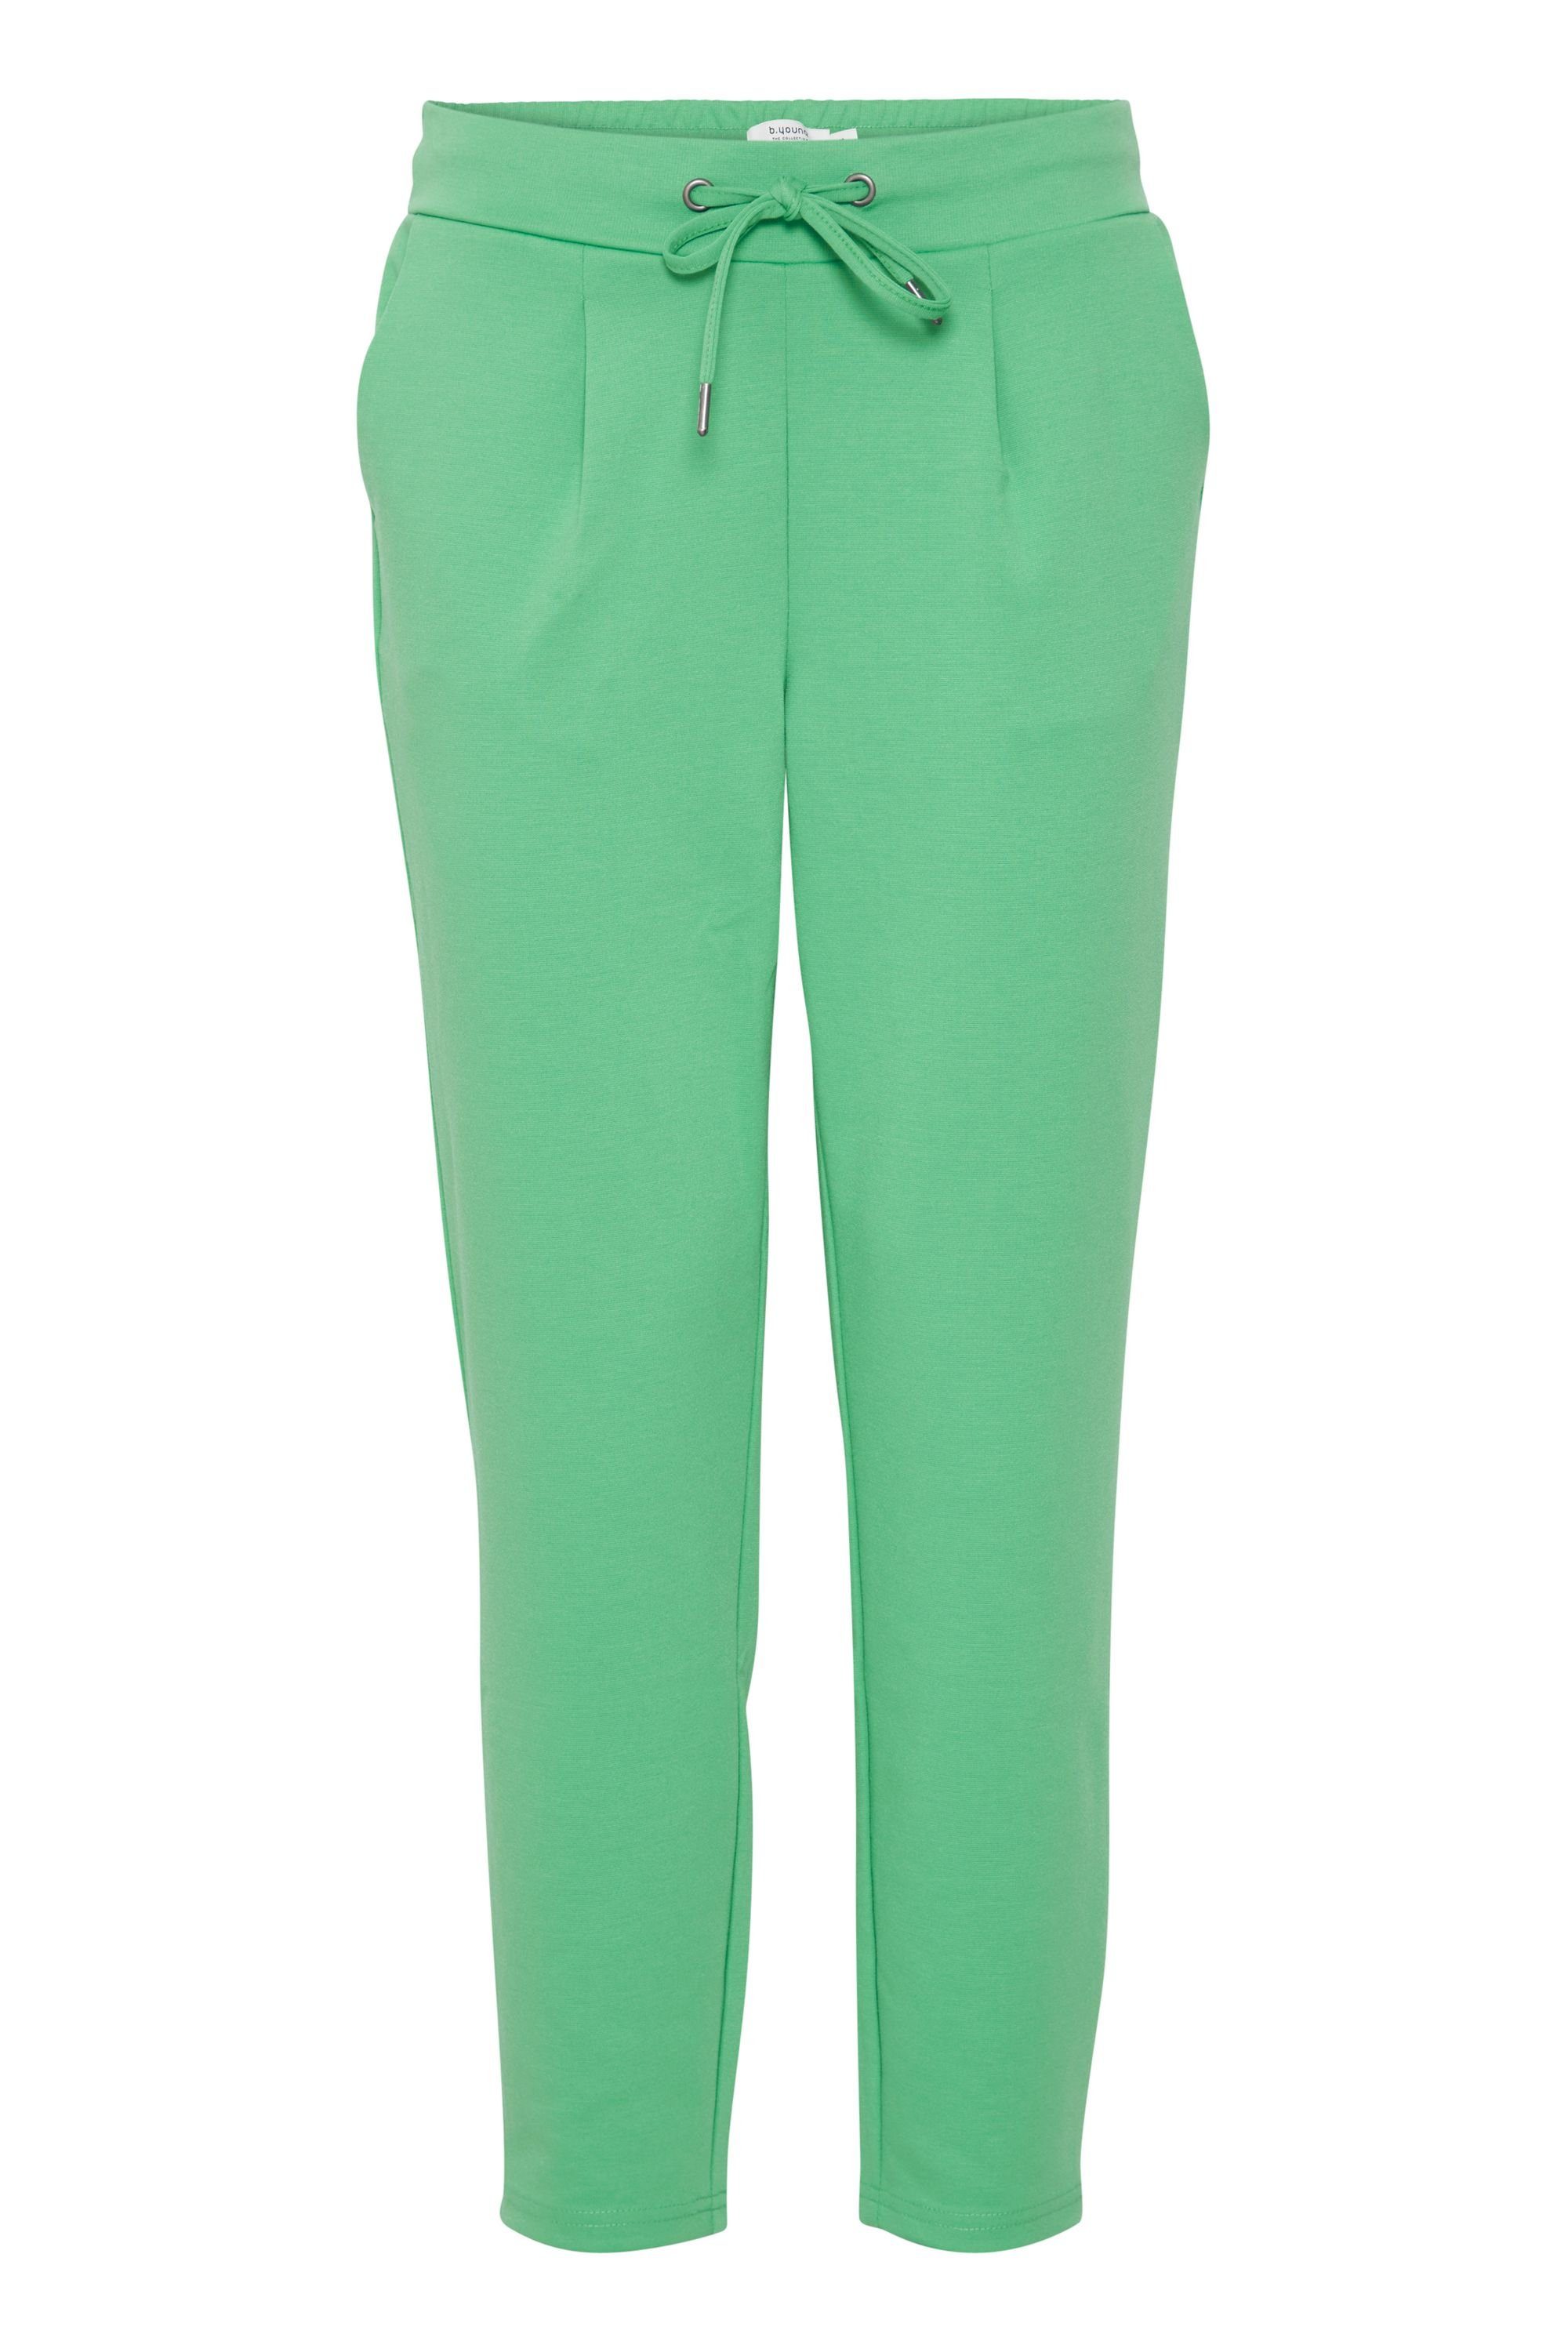 - Green (165930) Ming b.young BYRizetta pants Stoffhose 20803903 crop